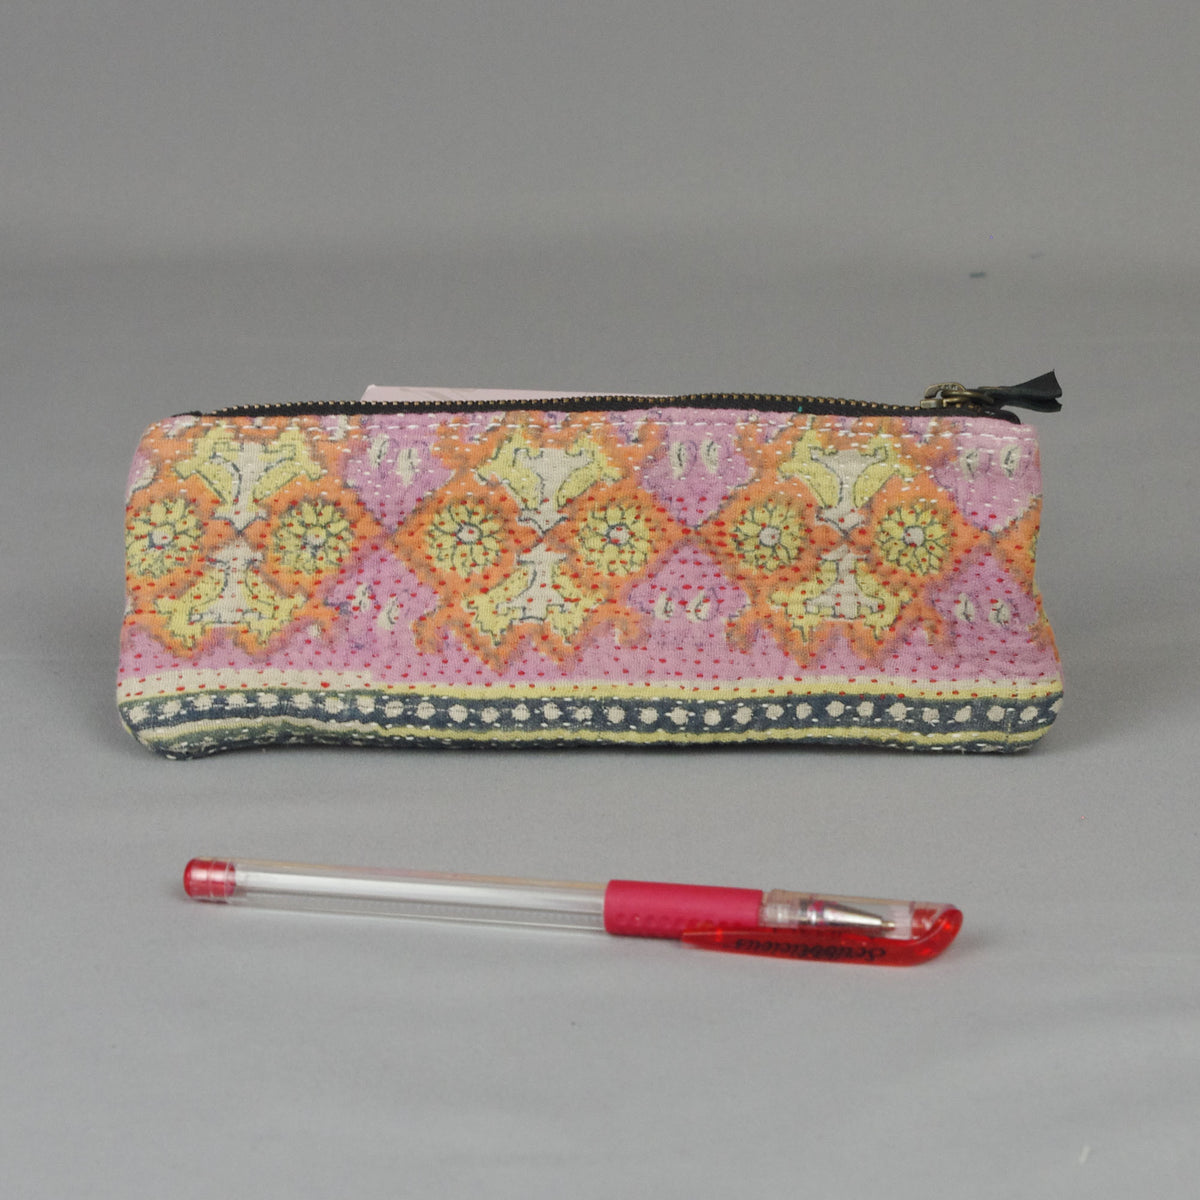 Vintage Kantha Small Pencil Case - Pink yellow Floral